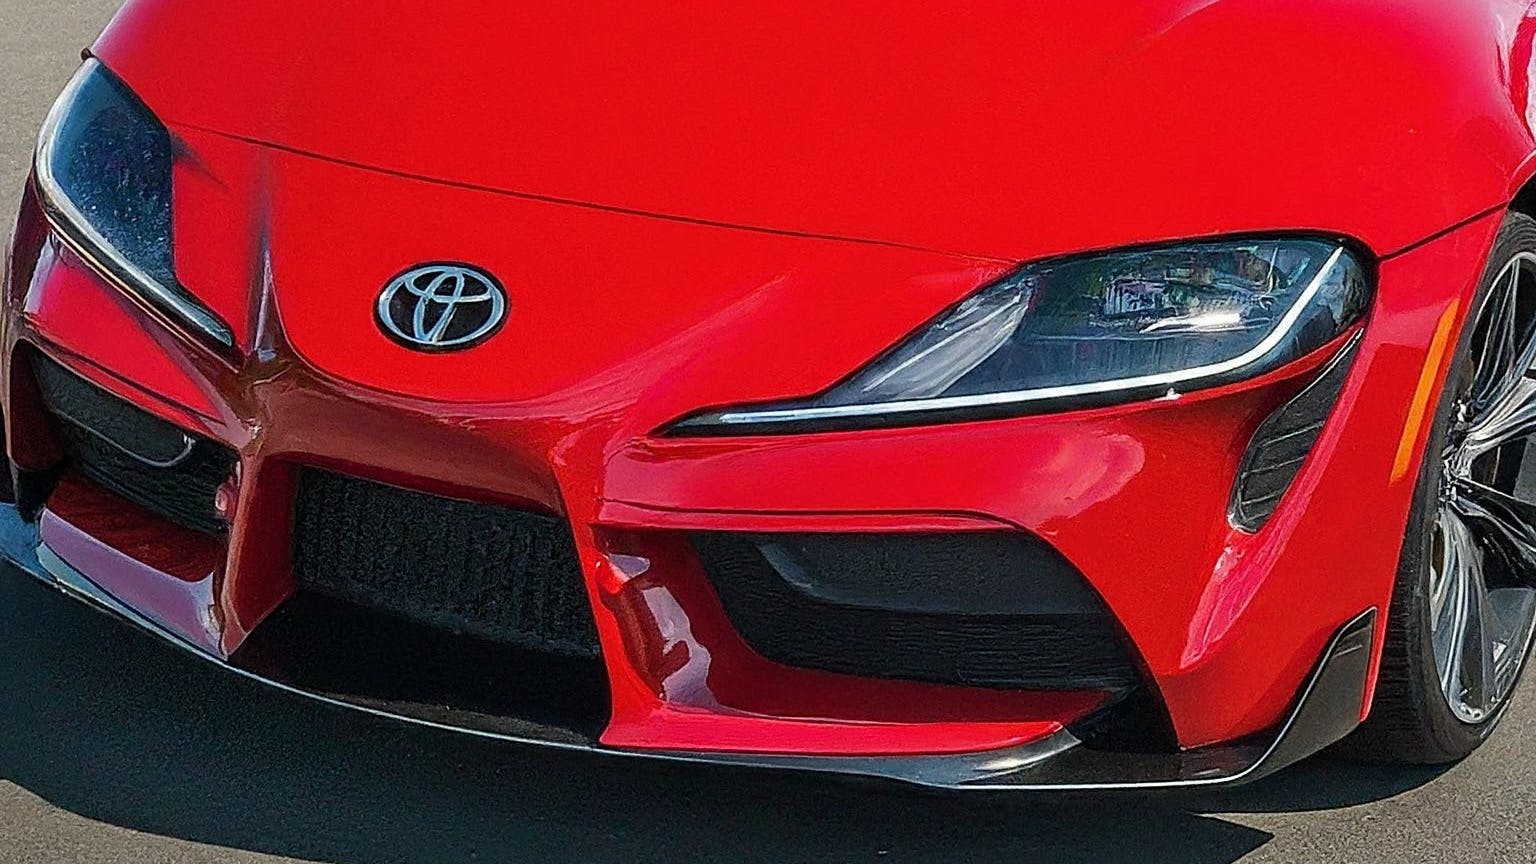 A red Toyota.